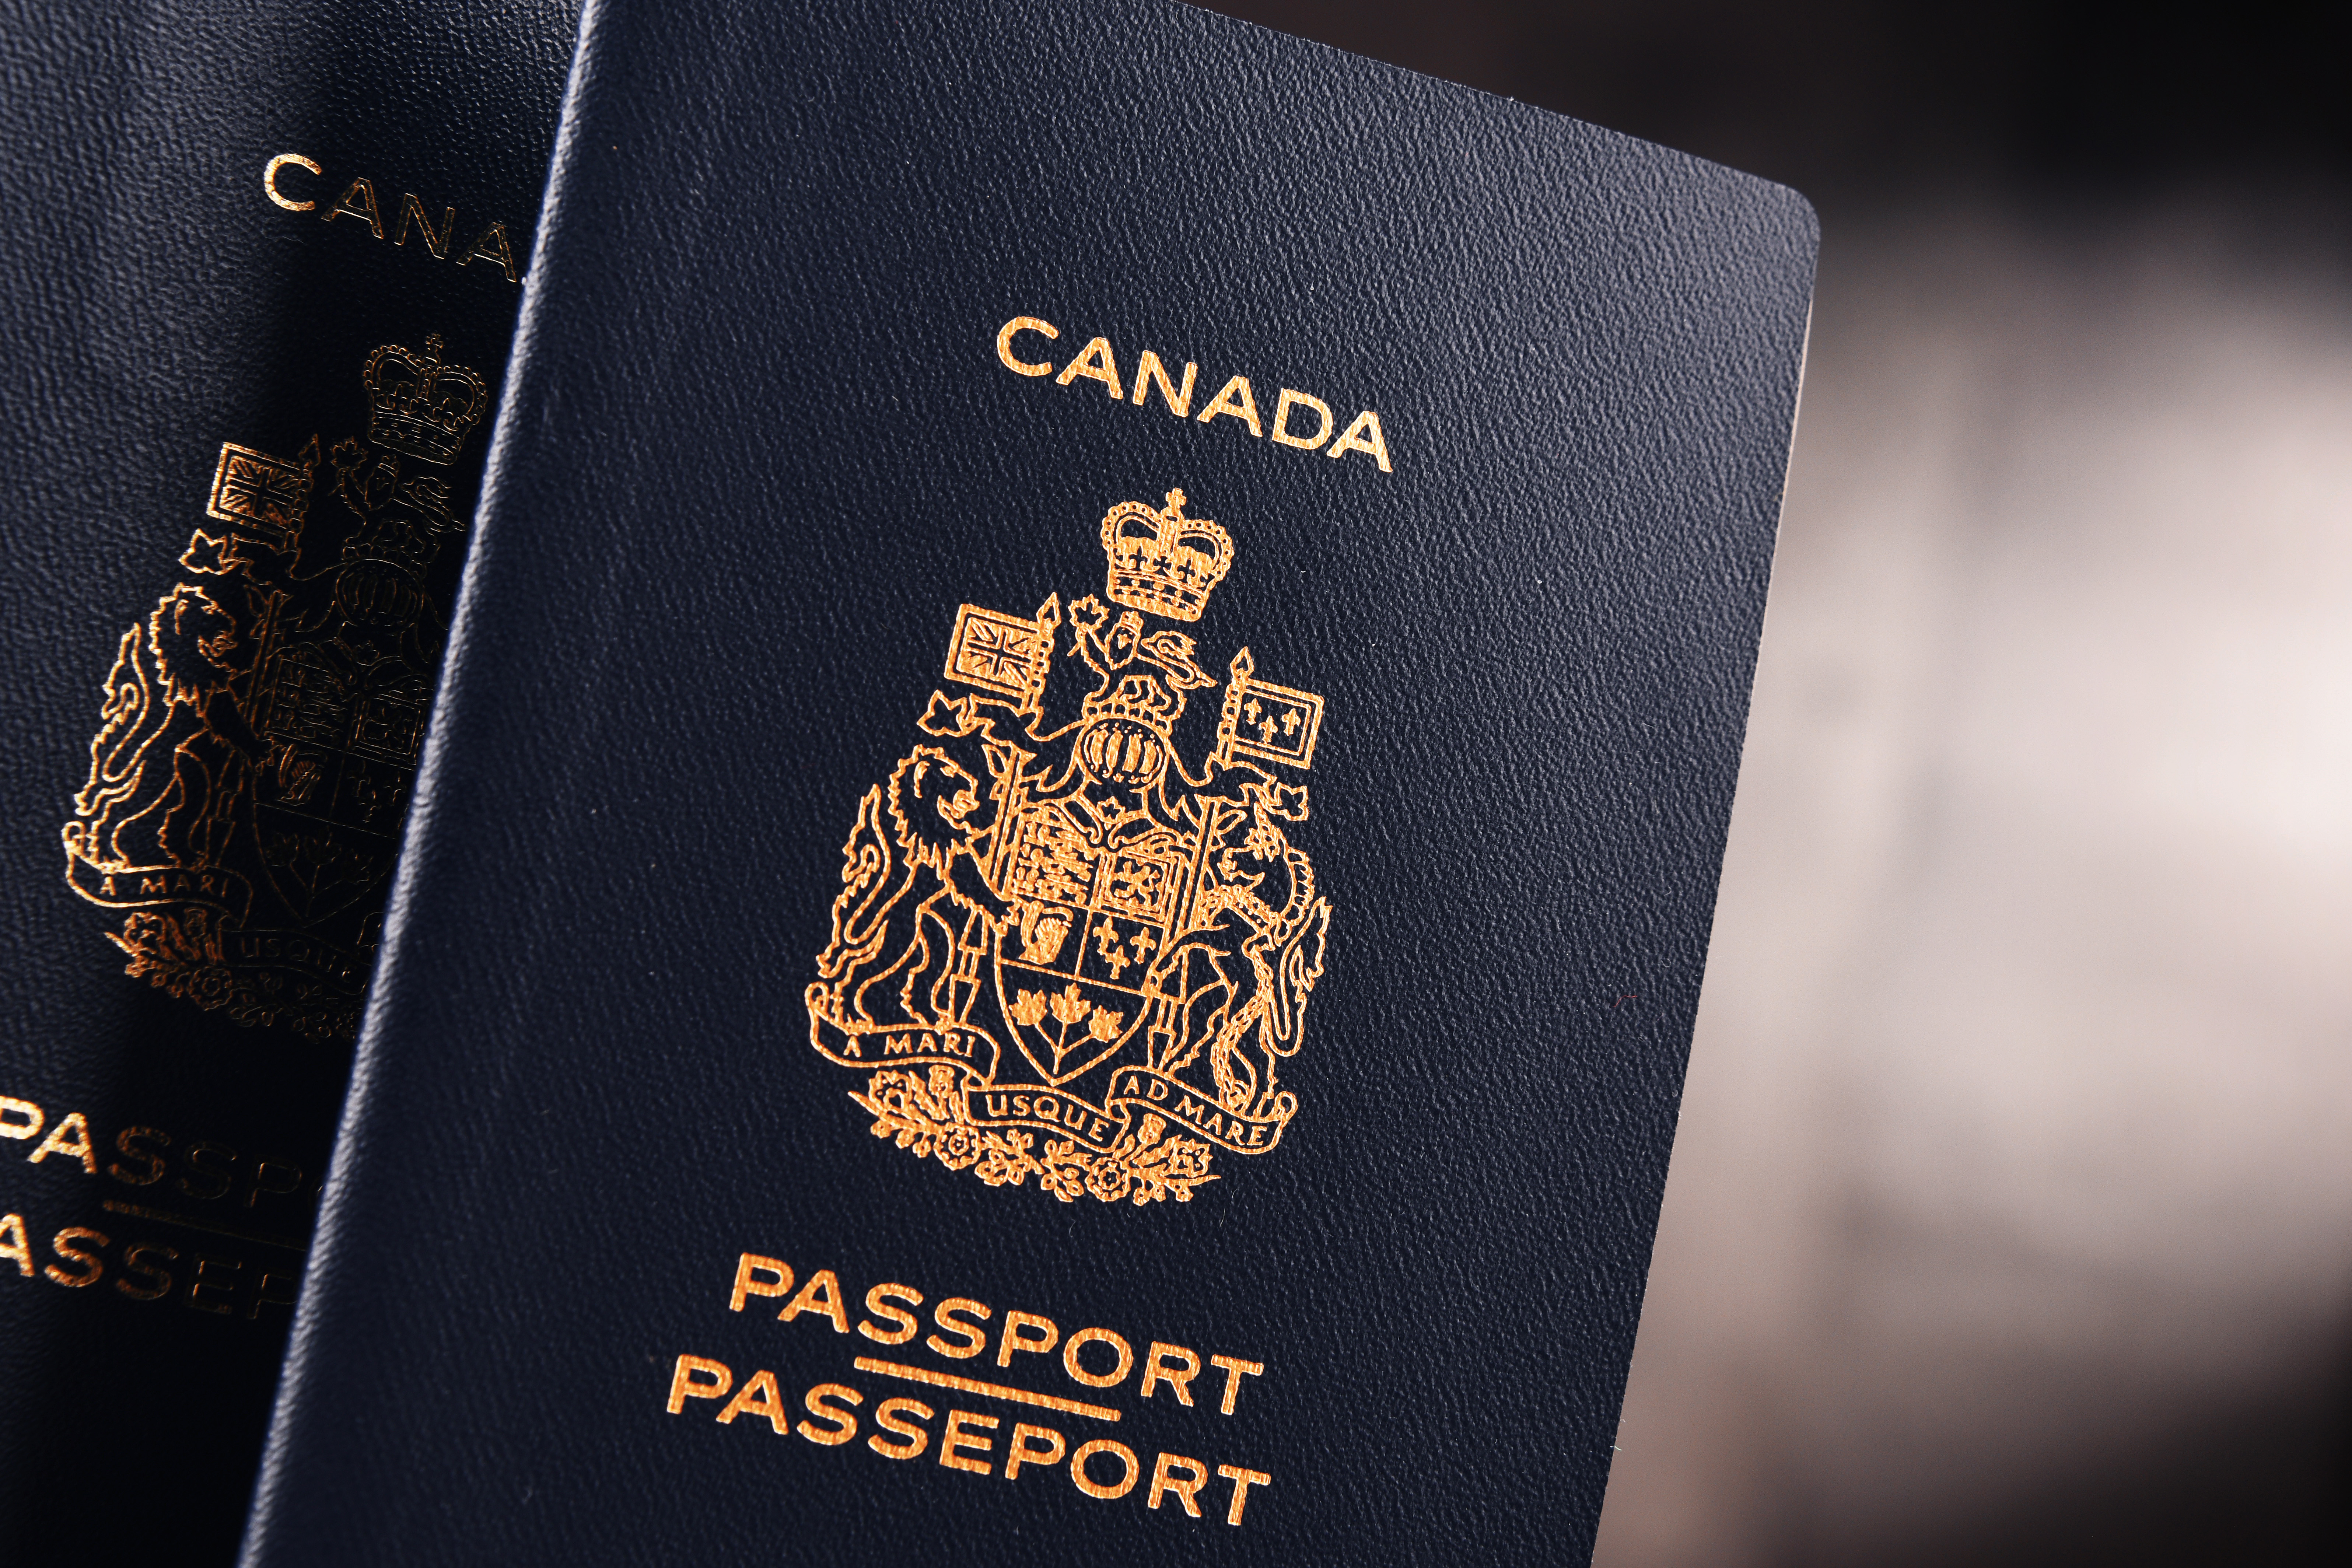 Canadian passport, it can be obtained by self-employed in Canada